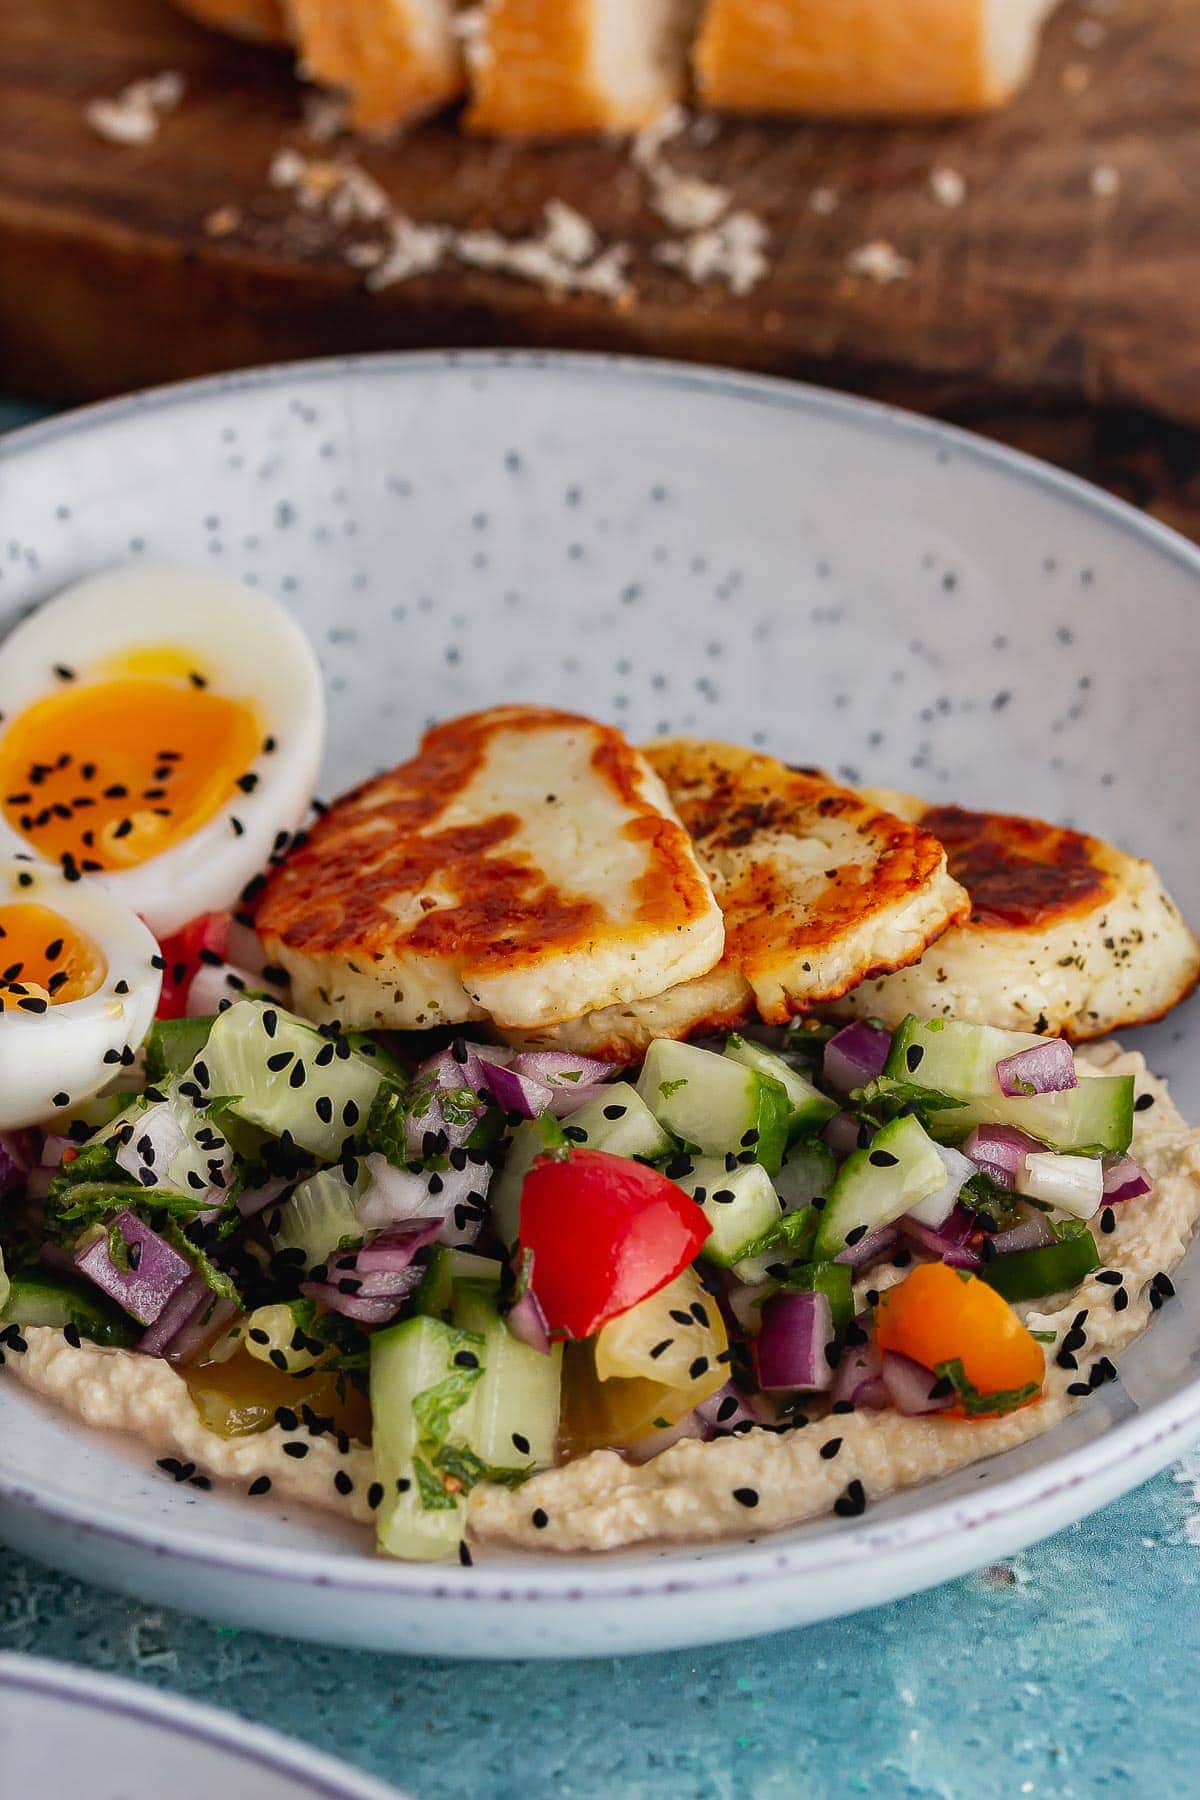 Blue speckled bowls with halloumi, hummus and salad